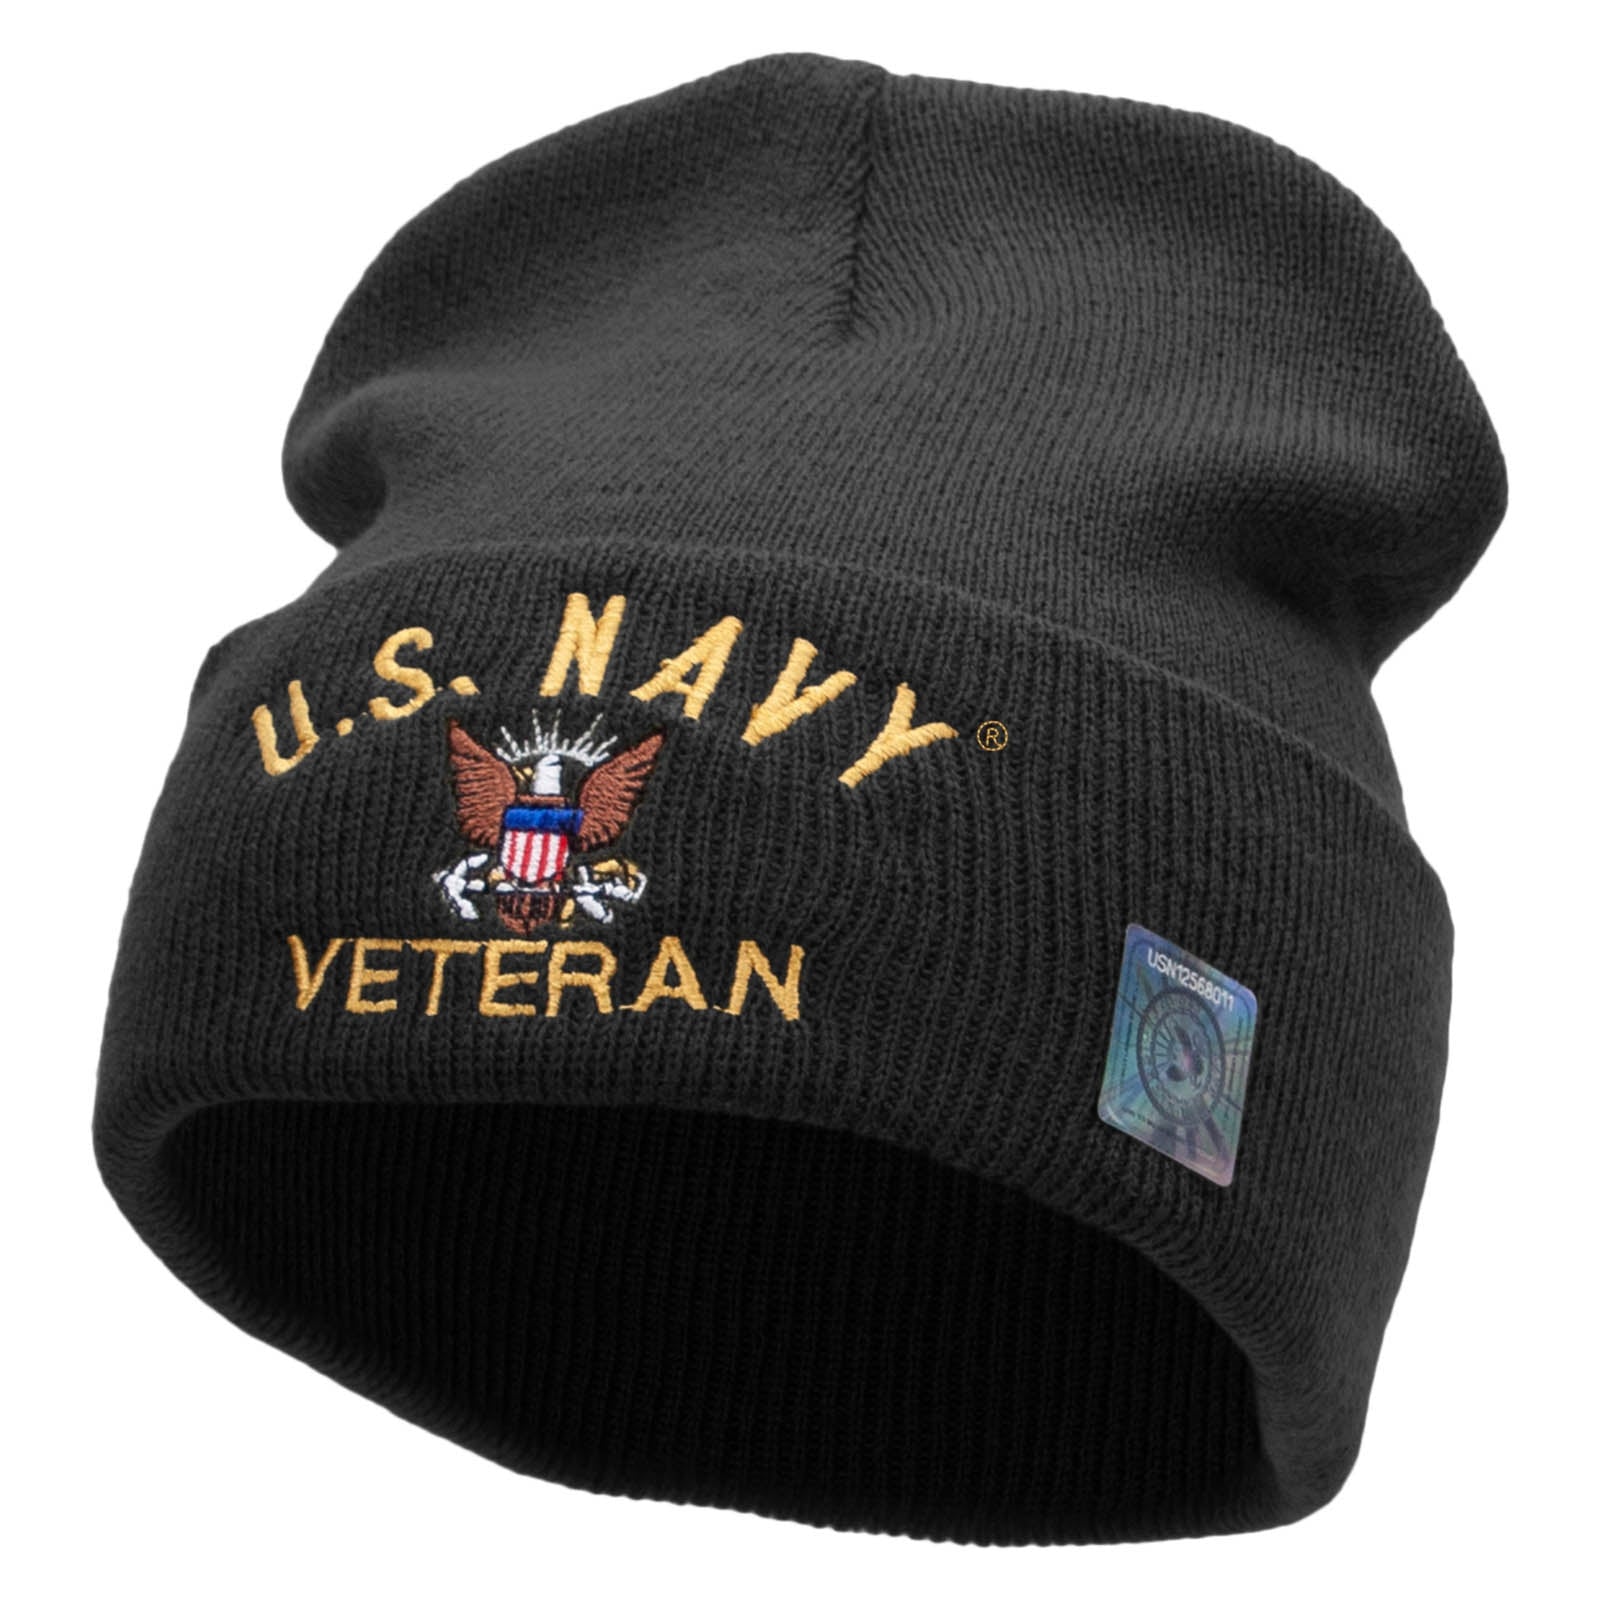 Licensed US Navy Veteran Military Embroidered Long Beanie Made in USA - Black OSFM